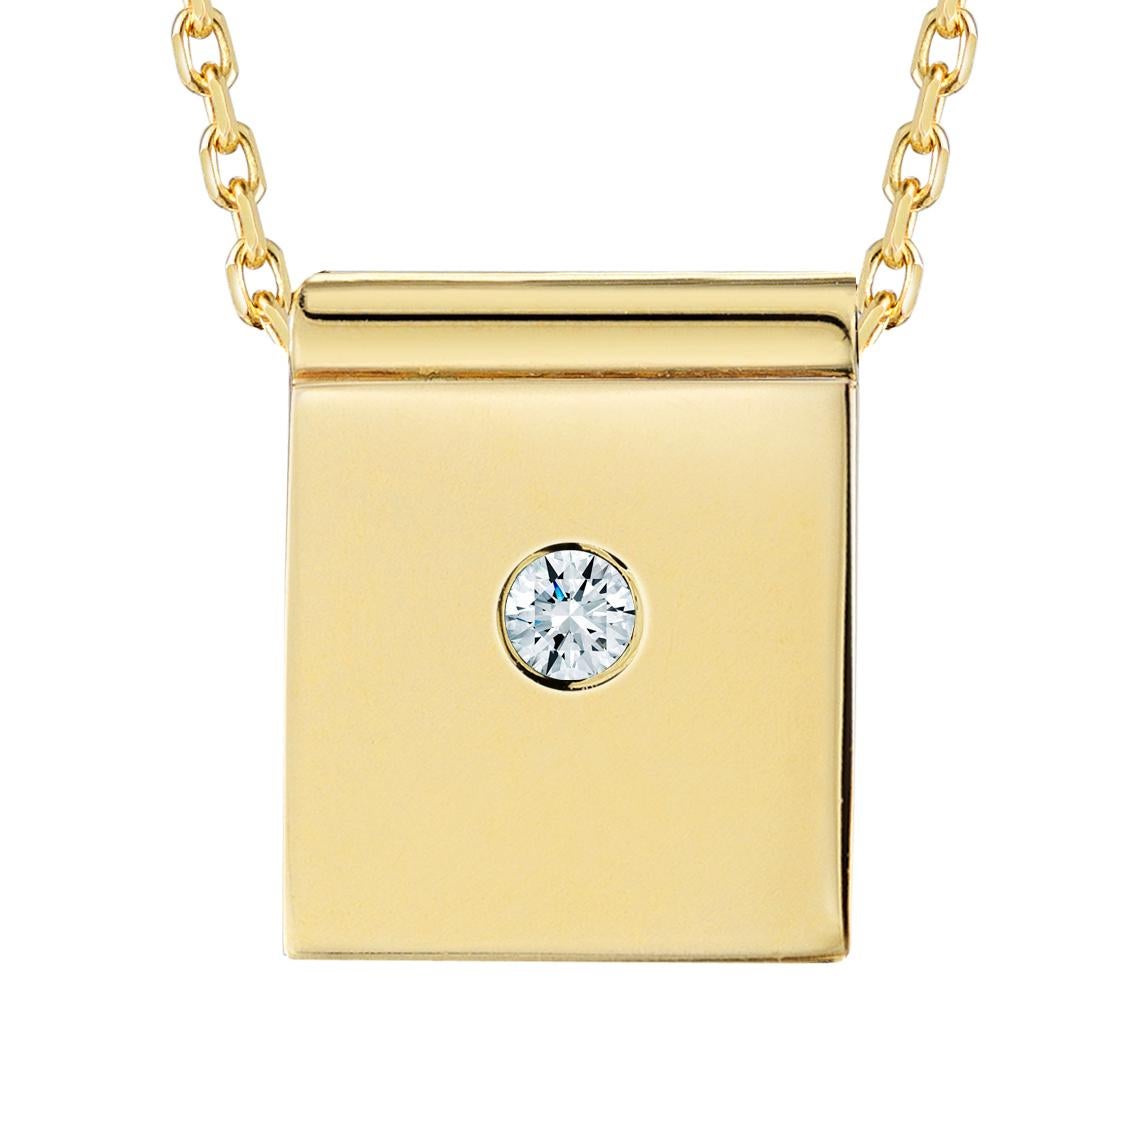 What makes this pendant special is the way the chain is threaded through tubing. The chain is diamond cut which adds reflection and sparkle.

18k yellow gold 
pendant measures 9mm x 9mm 
1.7mm diamond 
20